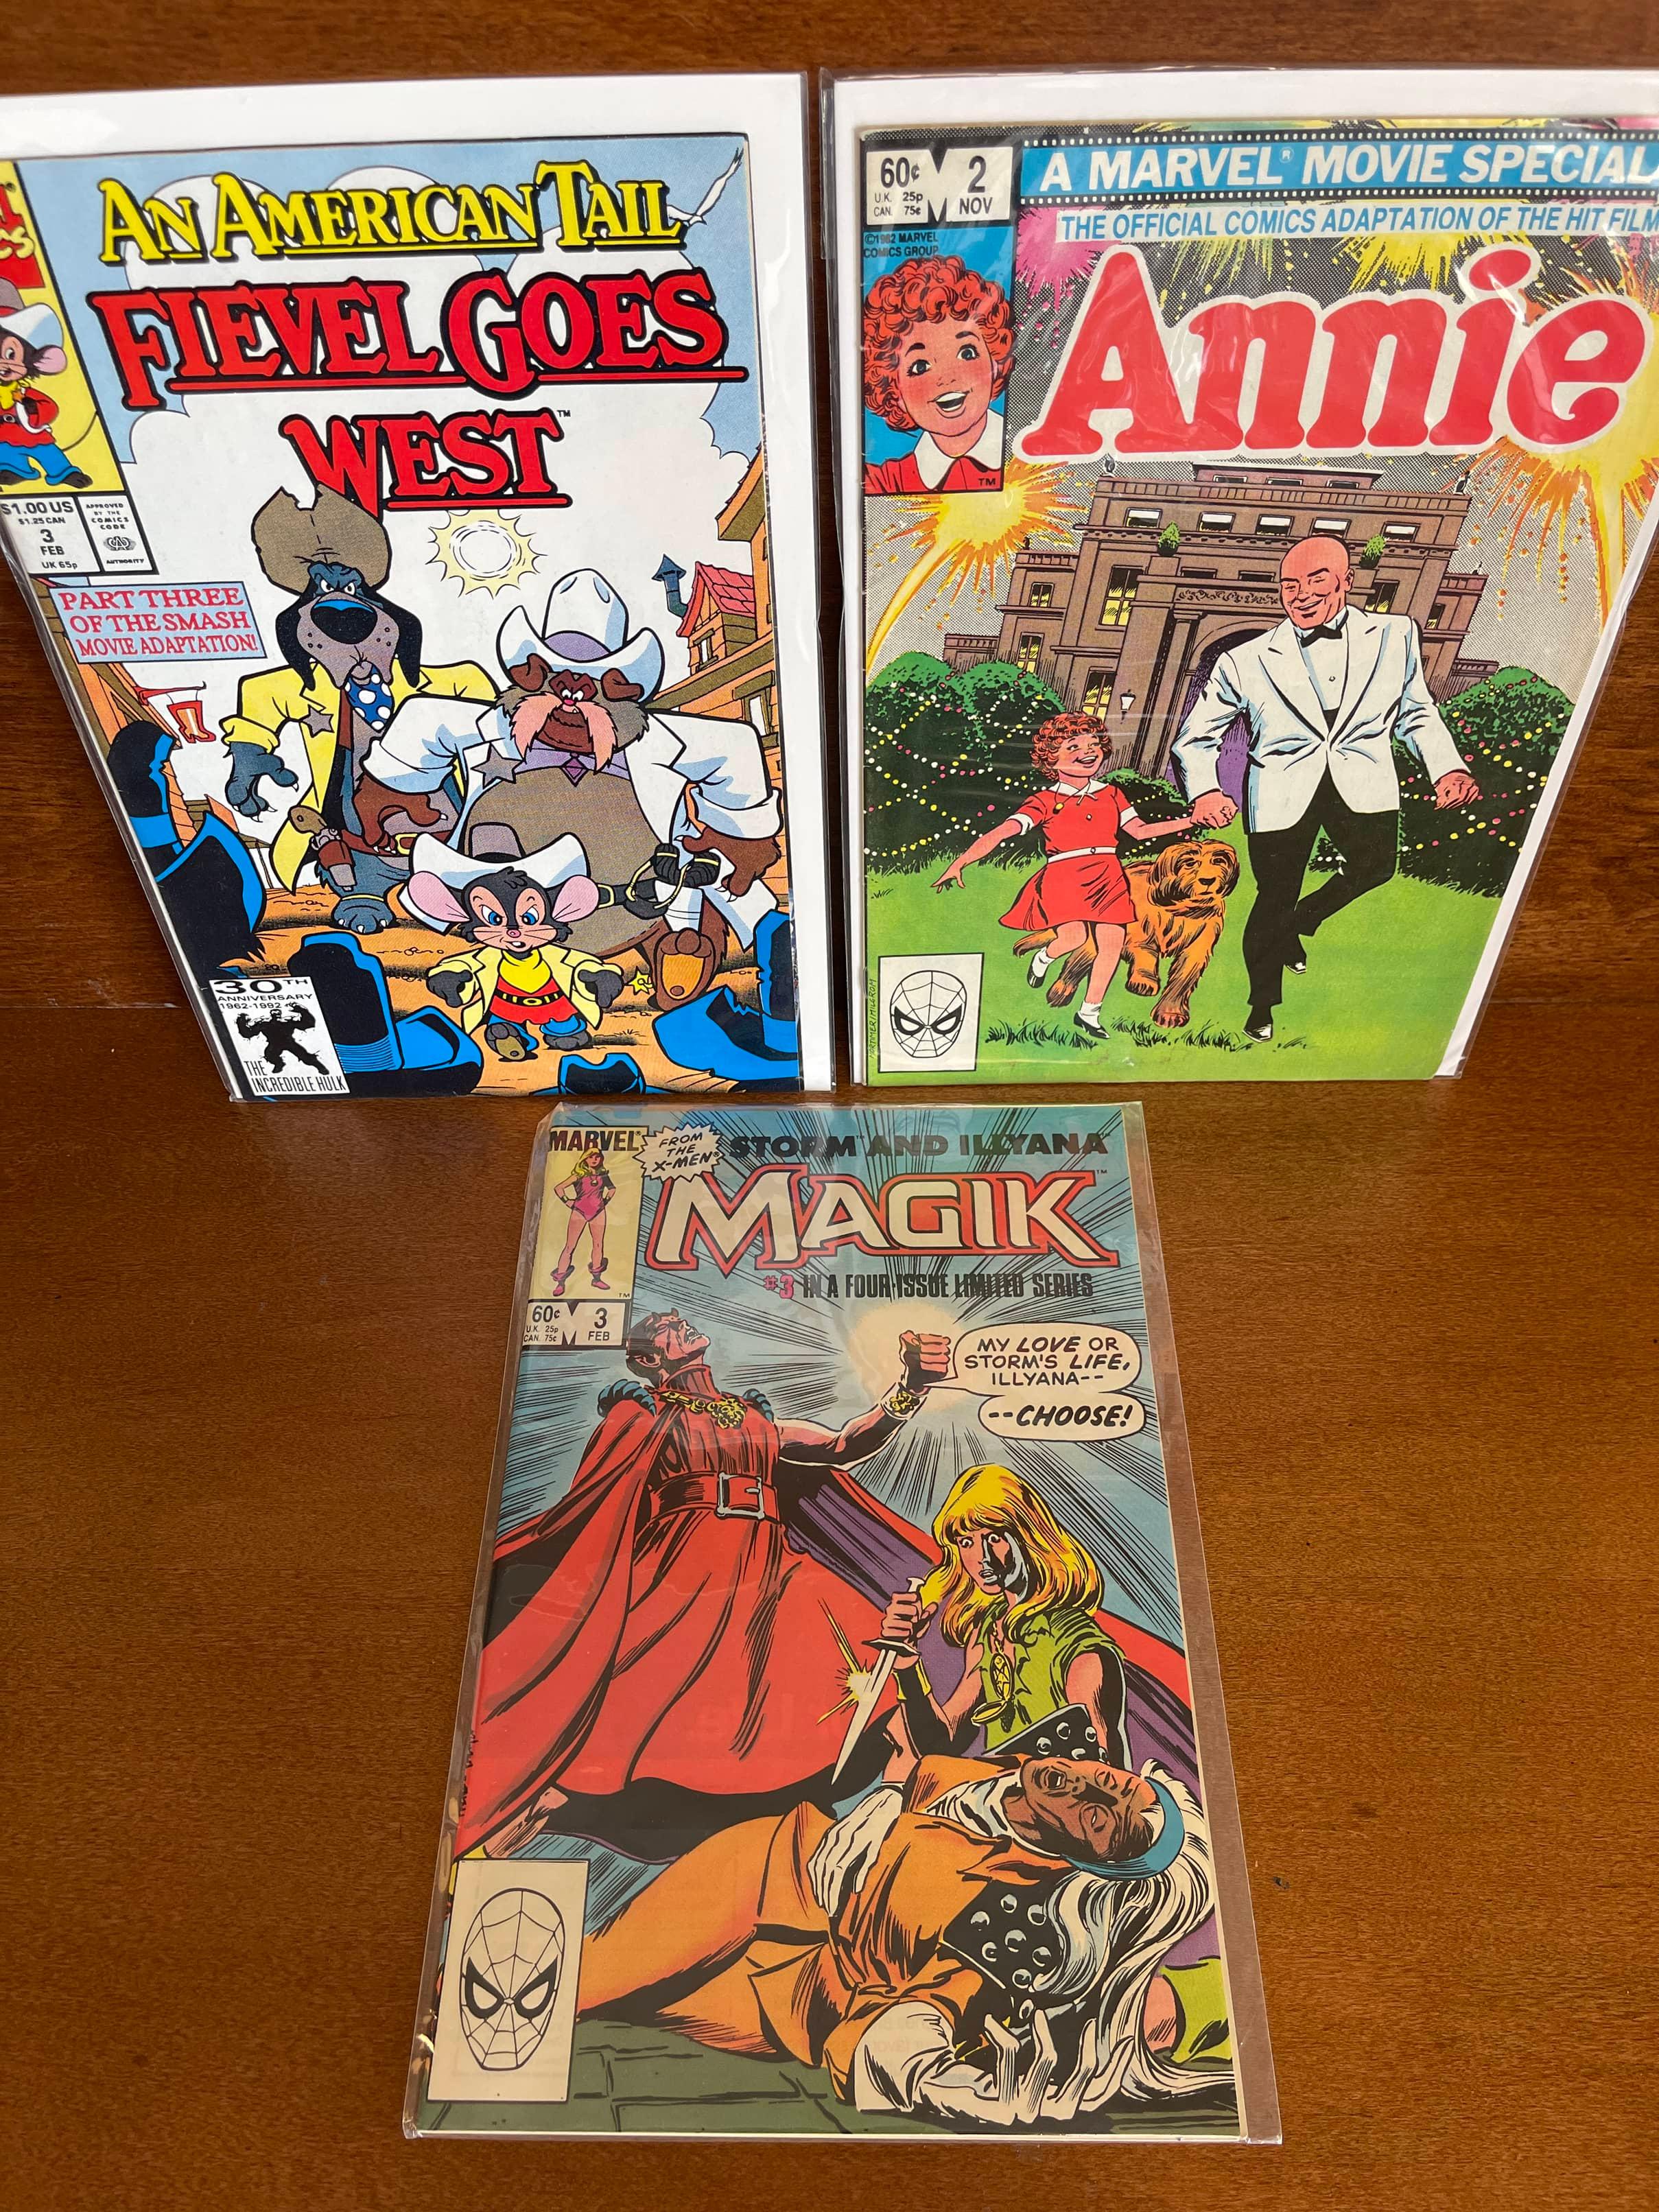 3 Issues Storm & Illyana Magik #3 Annie #2 An American Tail Fievel Goes West #3 Marvel Comics